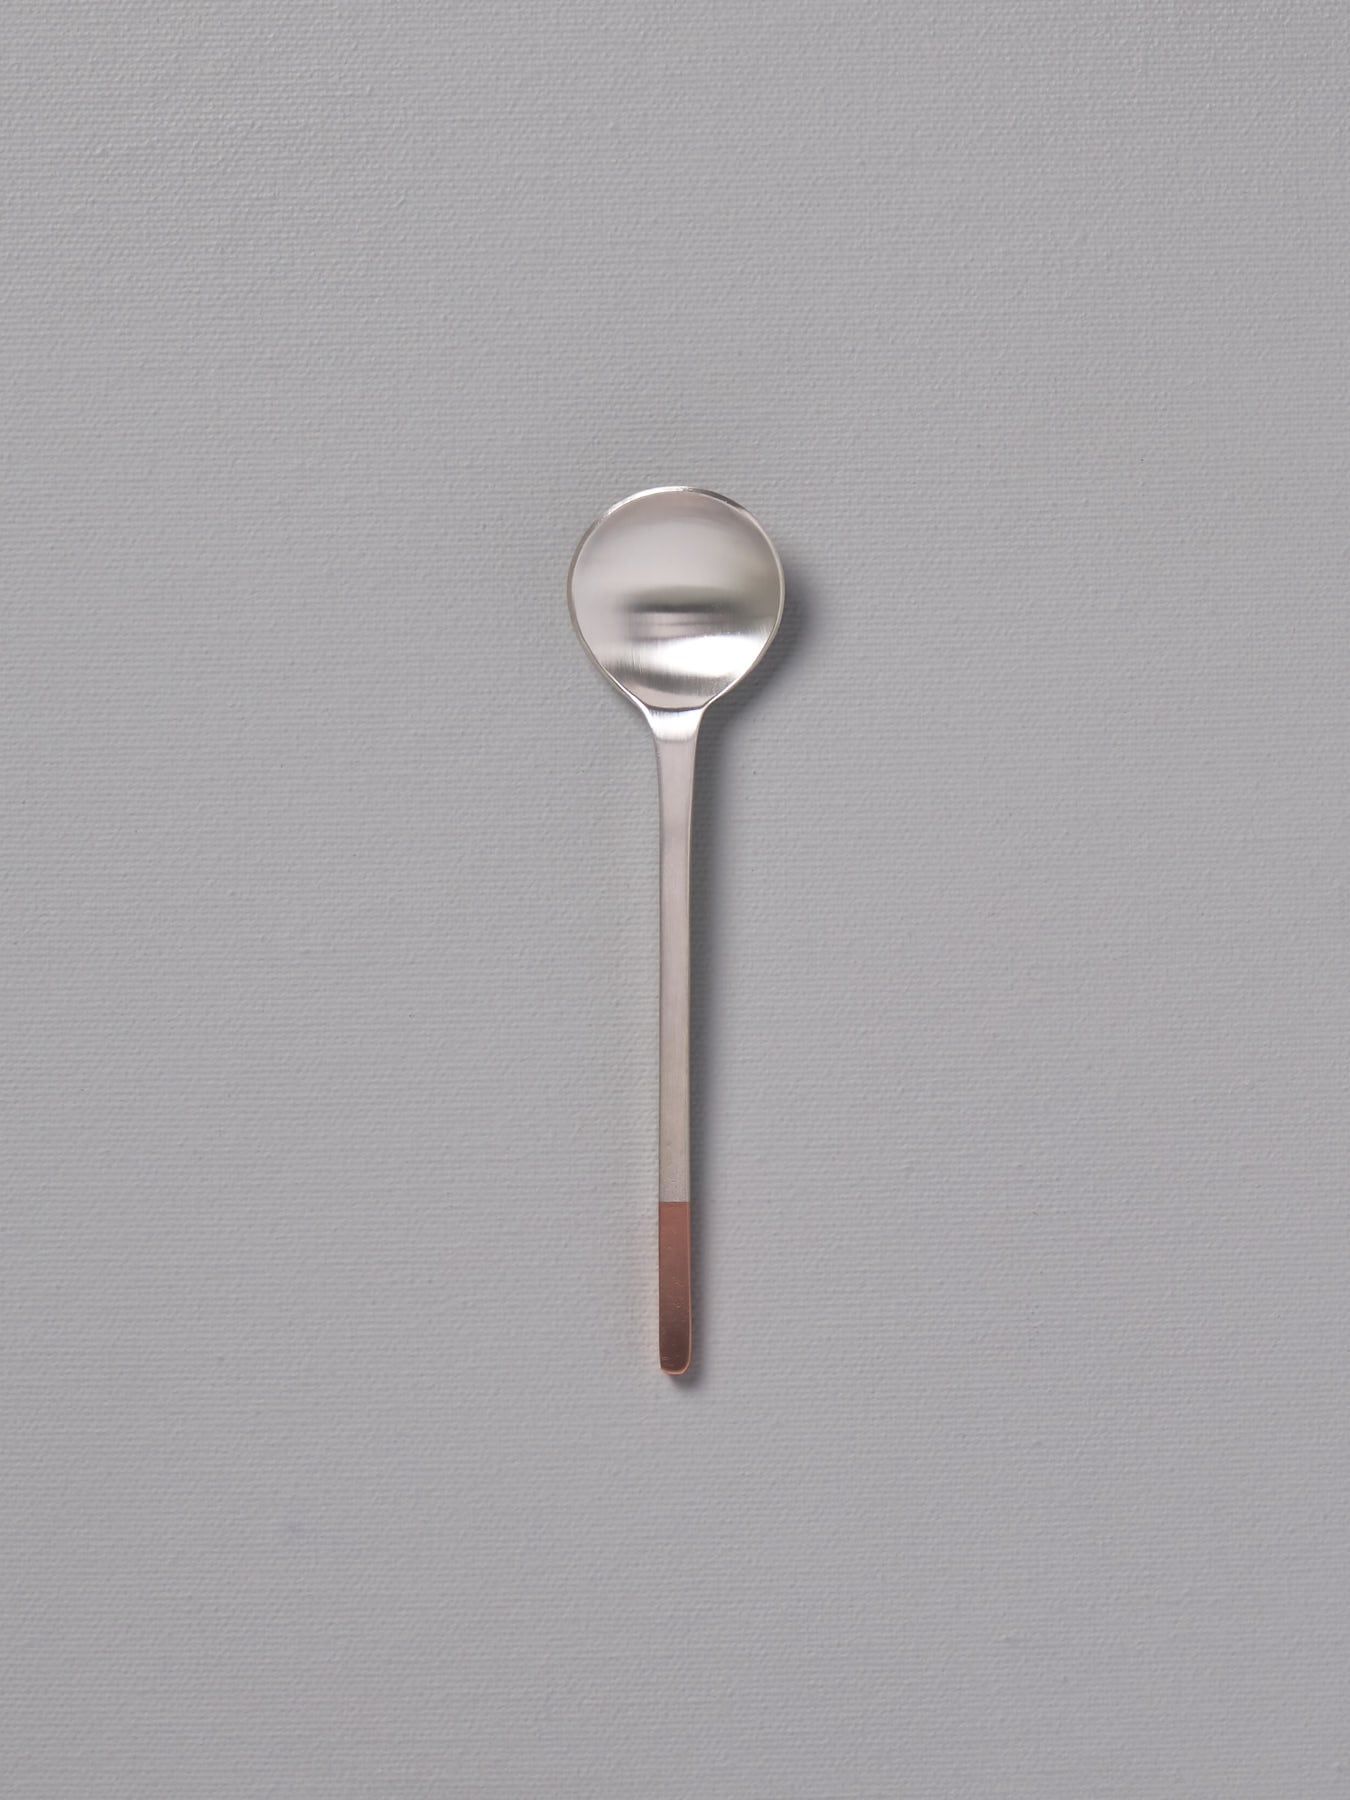 A small Copper and Stainless Steel Teaspoon by Kobo Aizawa on a grey background.